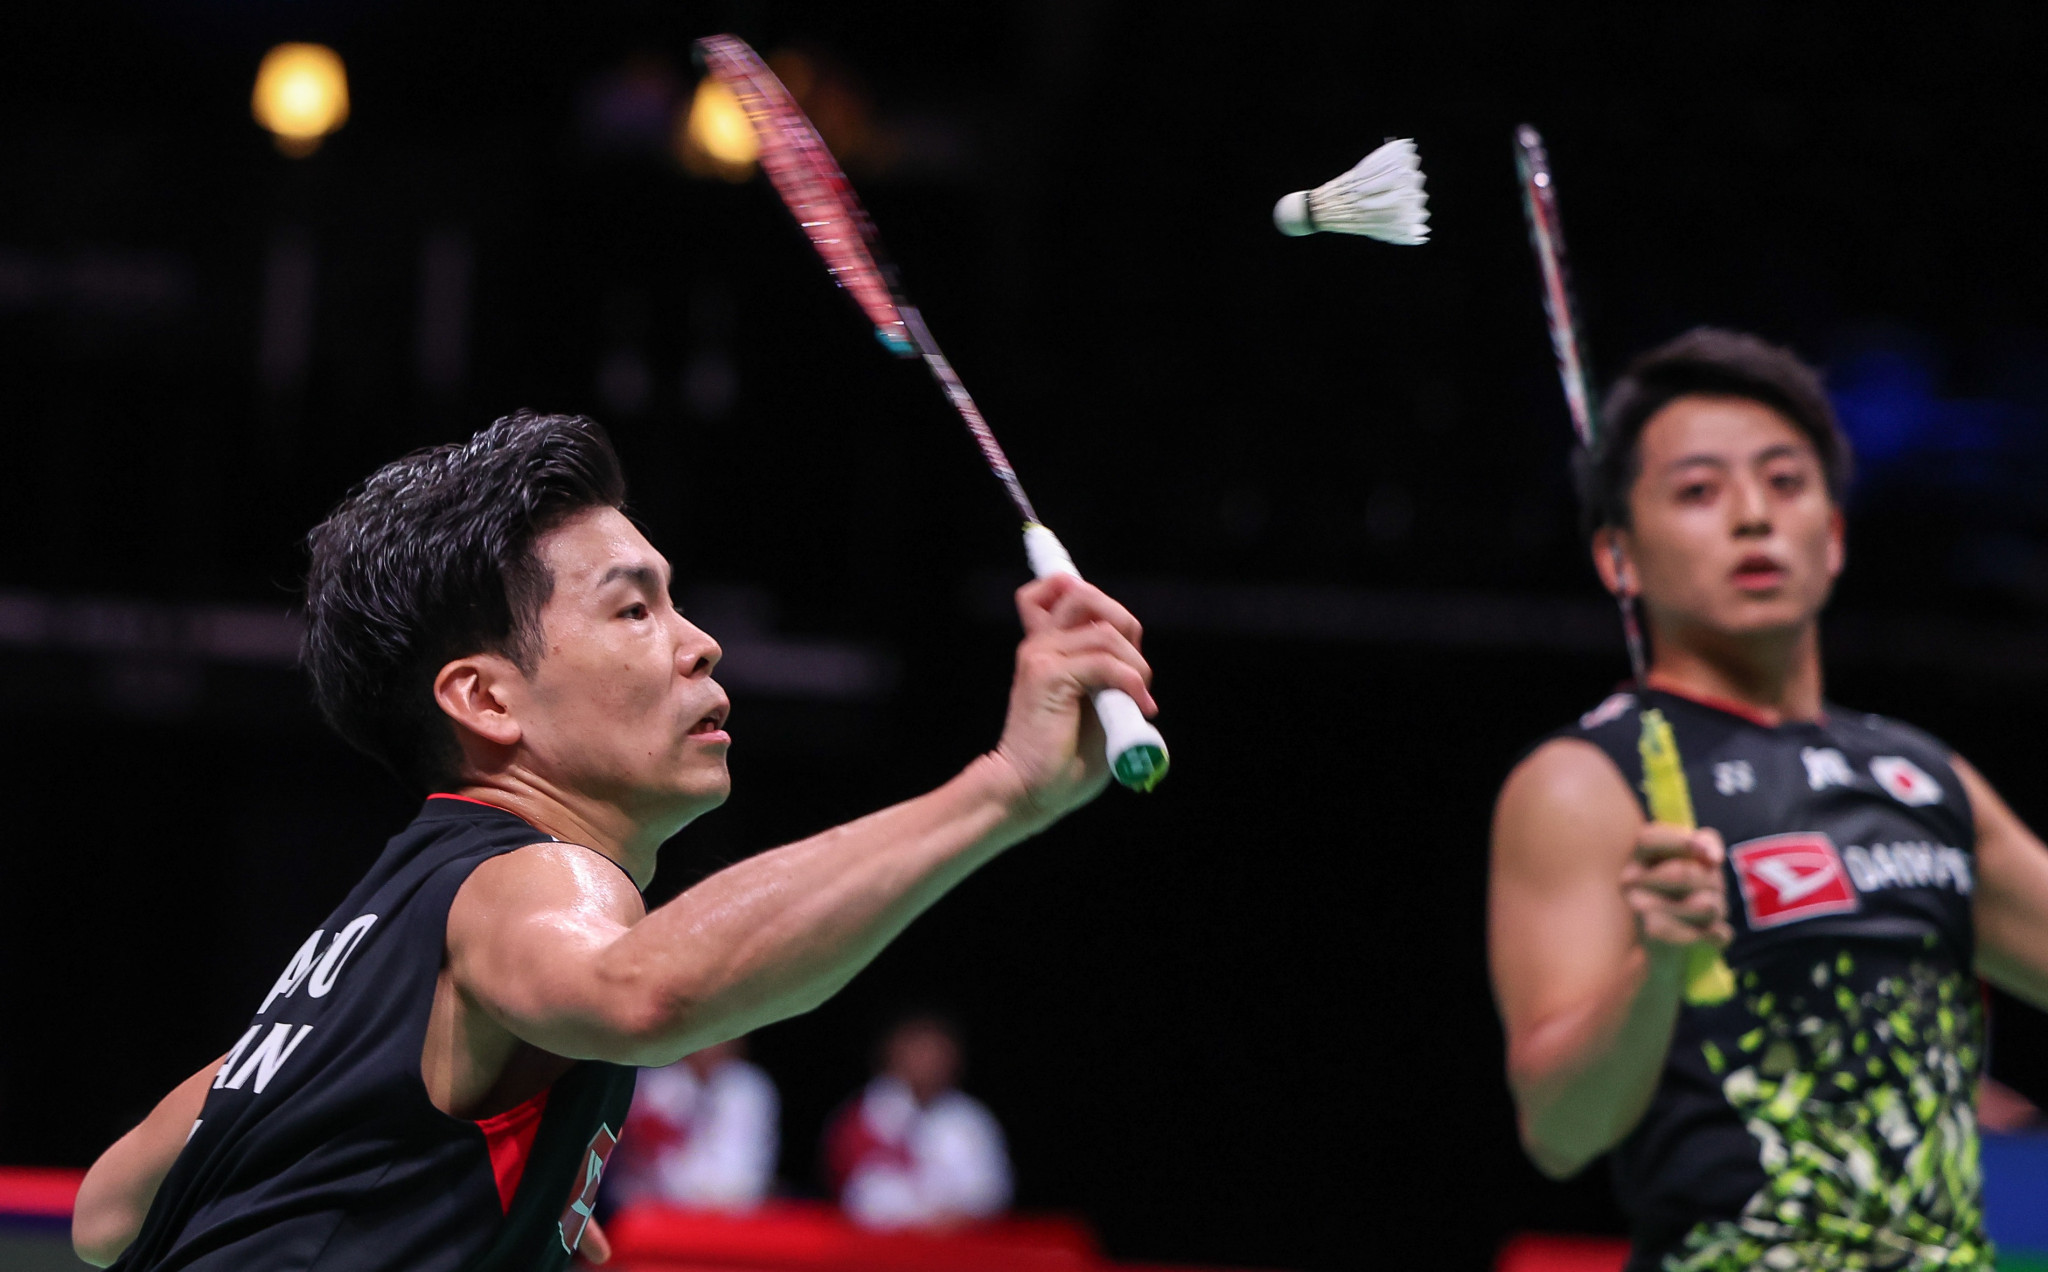 Japan's Akira Koga and Taichi Saito looked in fine form during their opening-round test ©Badmintonphoto